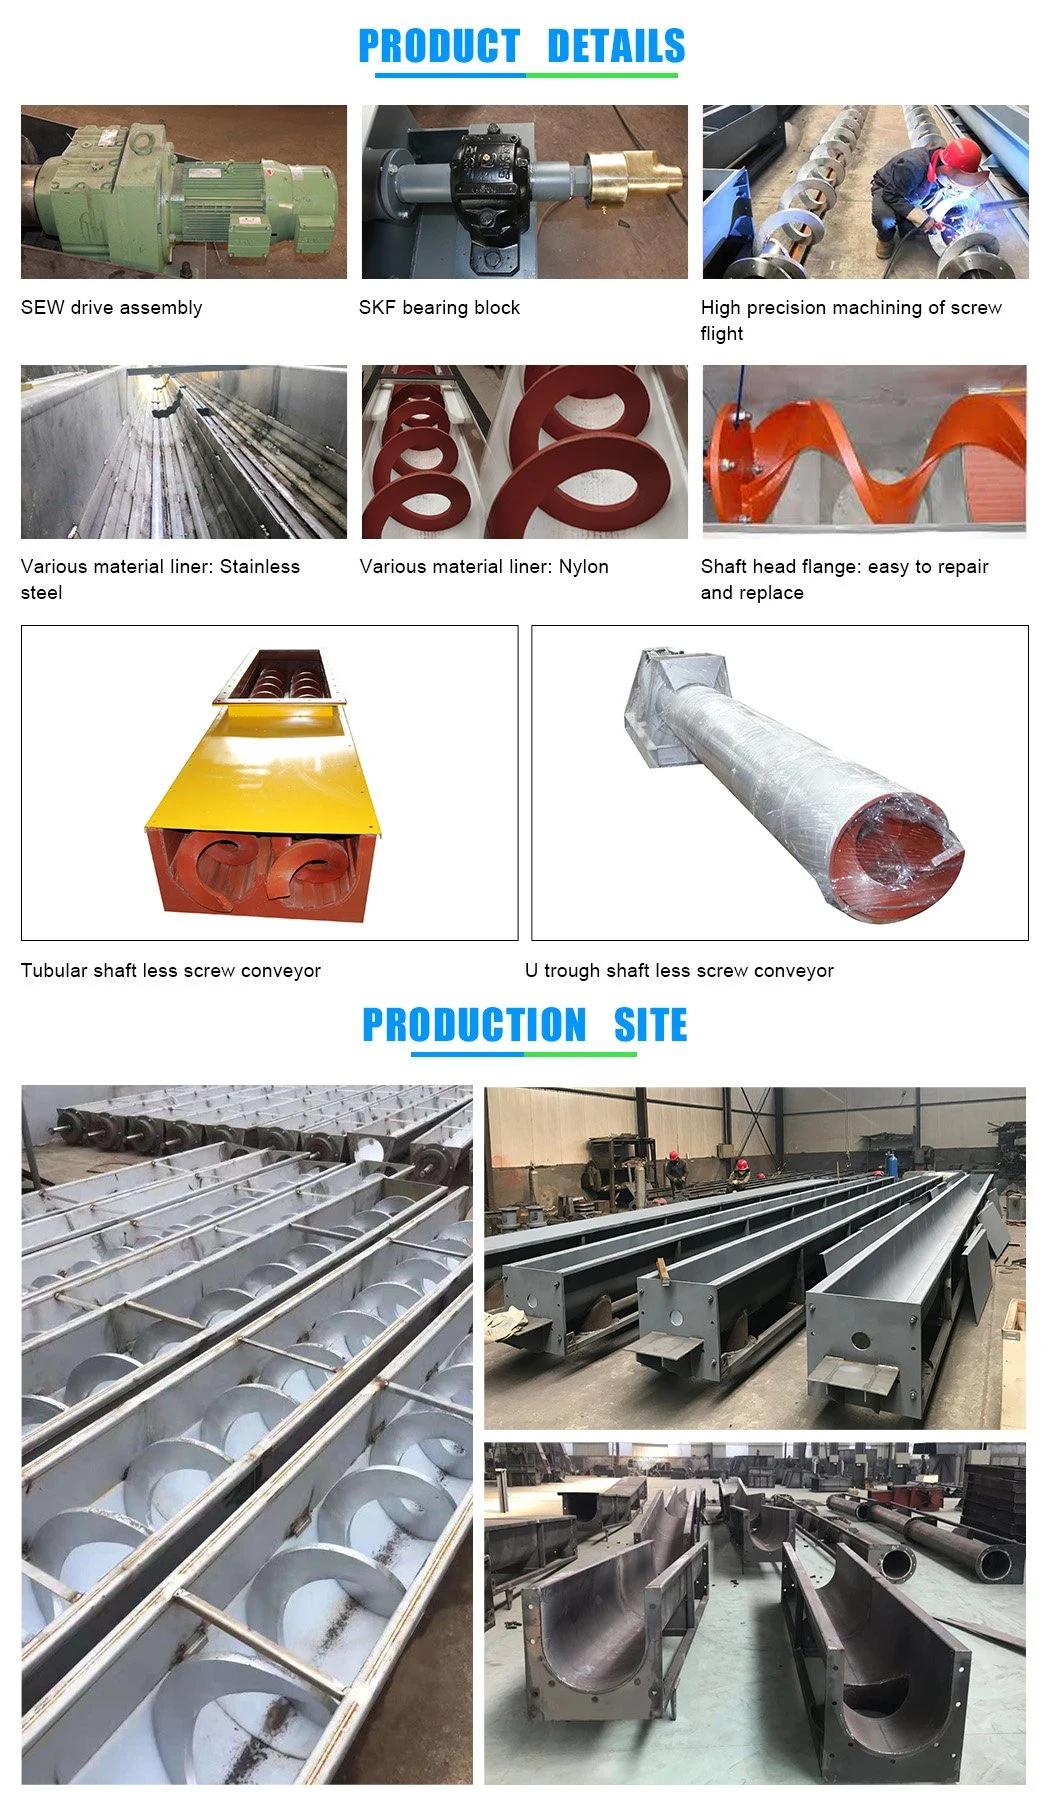 Best-Selling and Cost-Effective Shaftless Screw Conveyor with Wear-Resisting Scaleboard